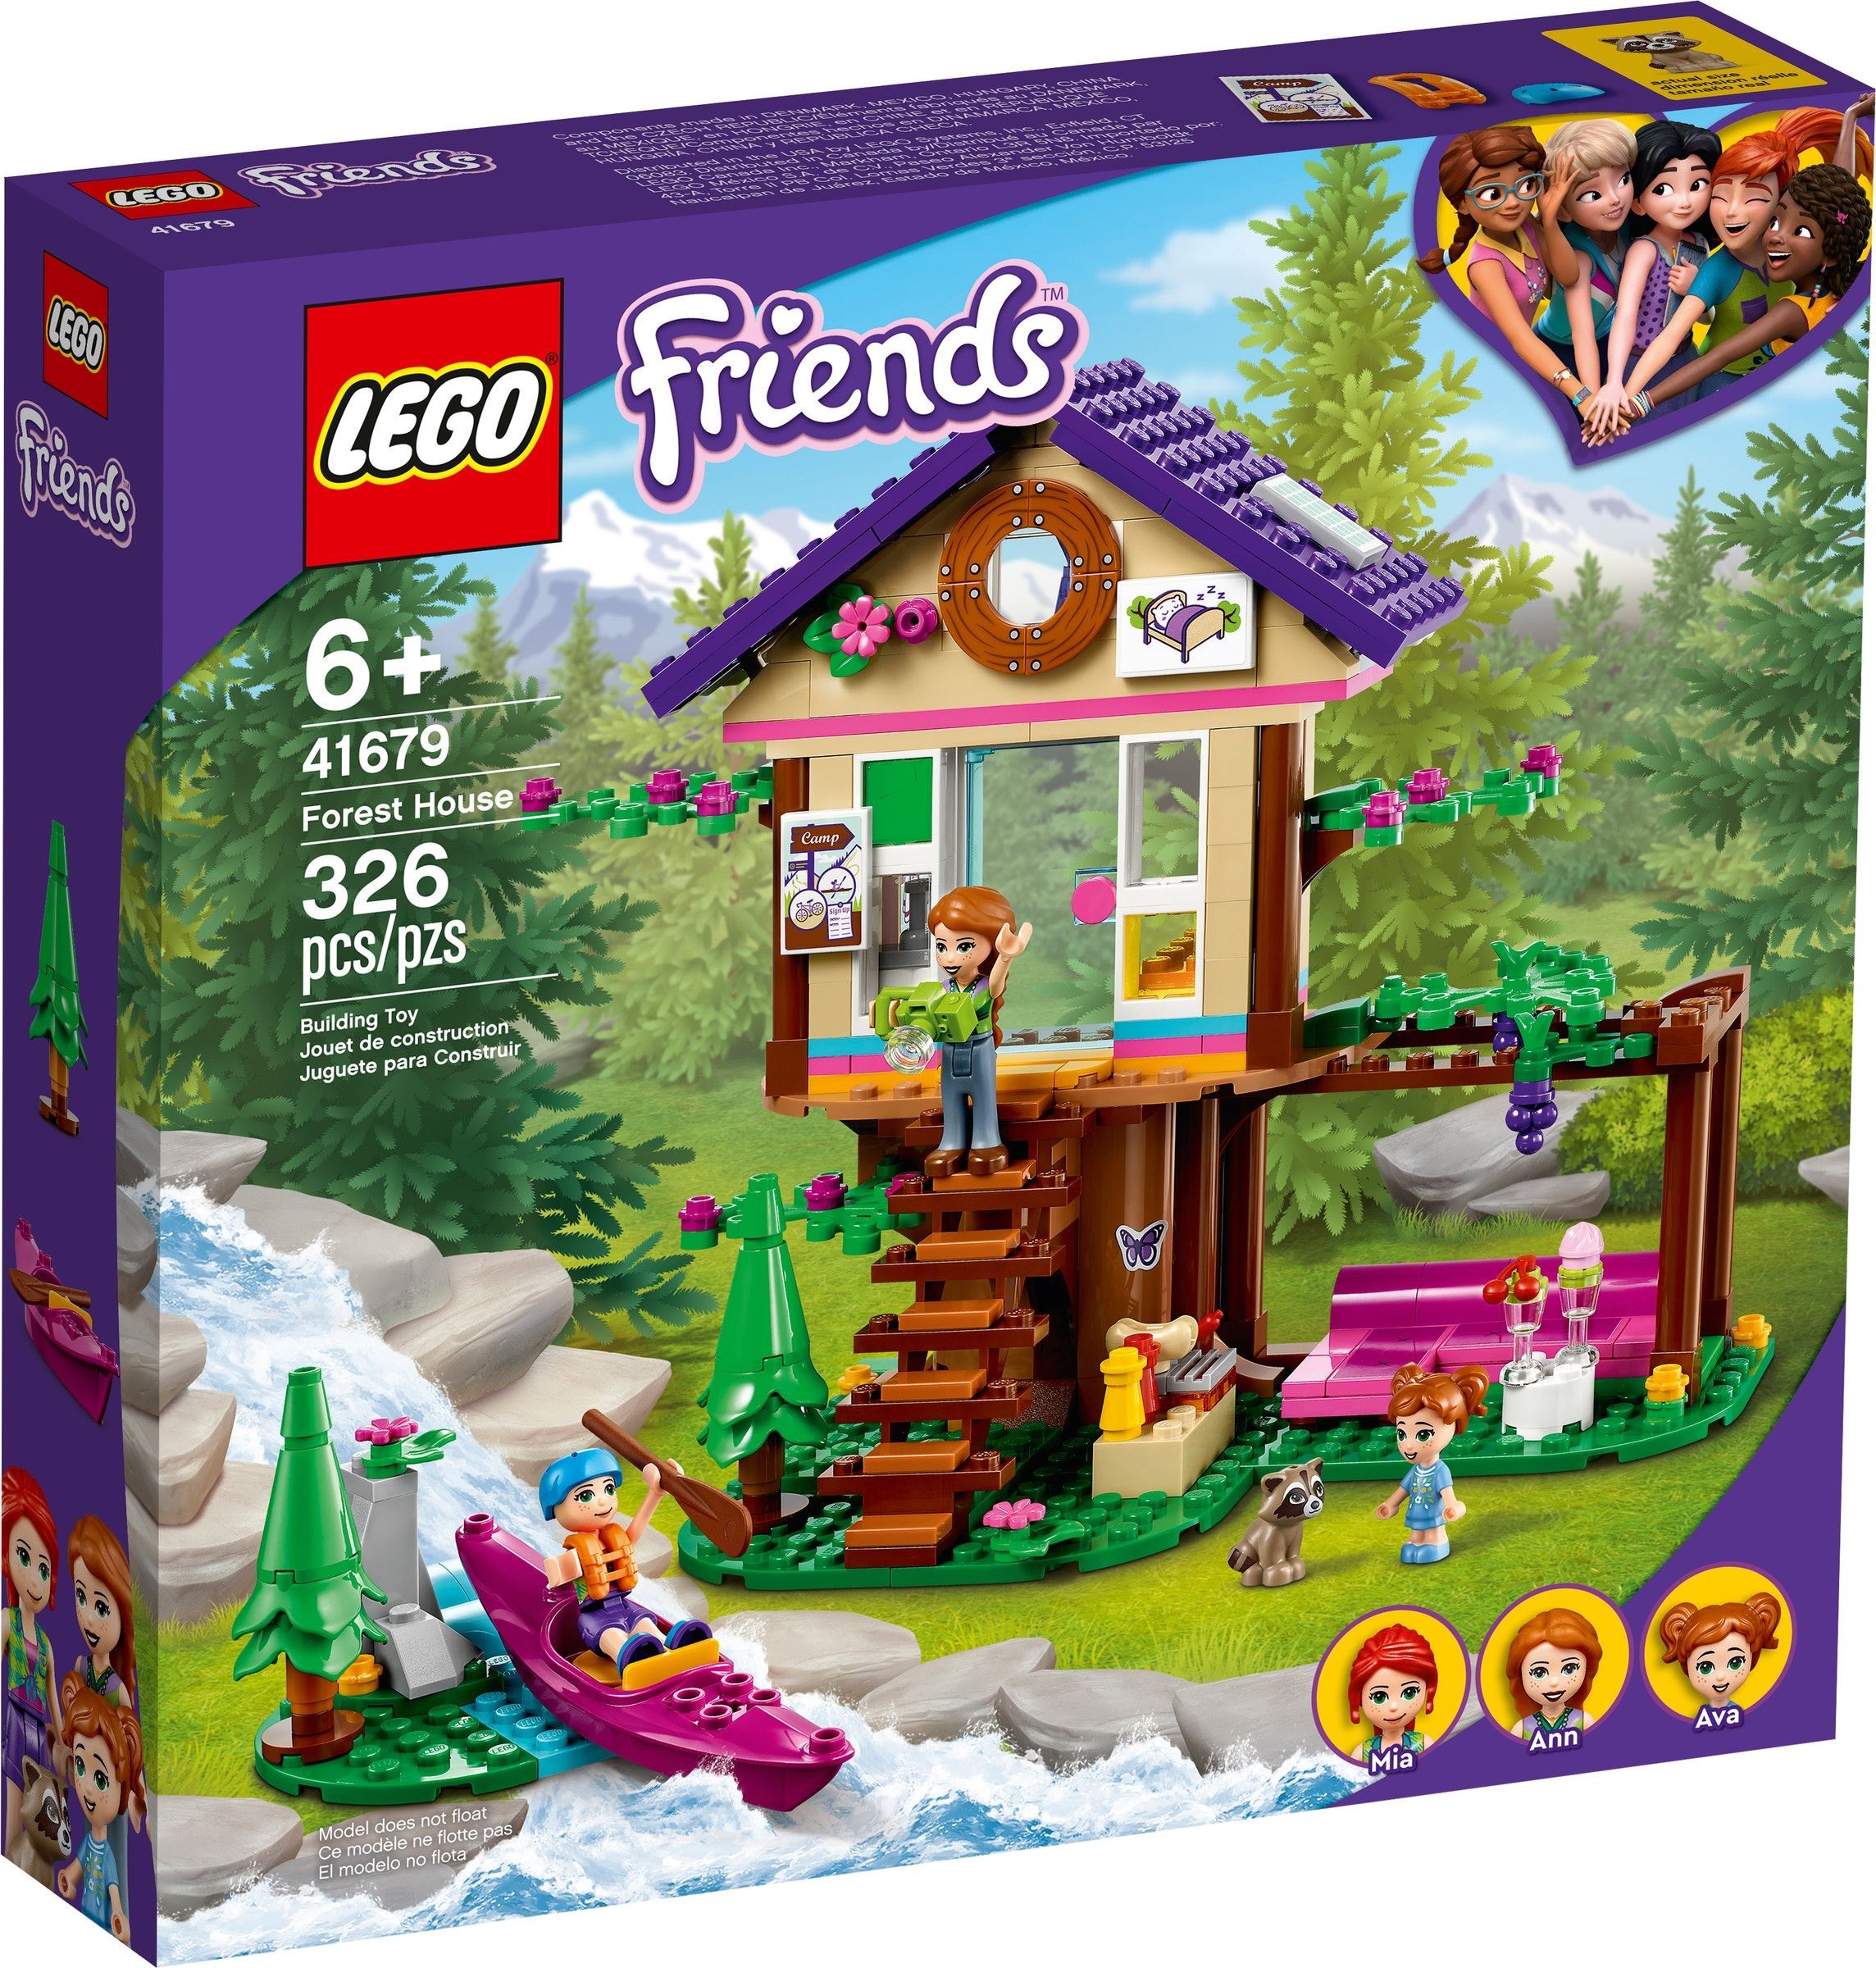 Complete guide to all the new August 2021 LEGO releases!